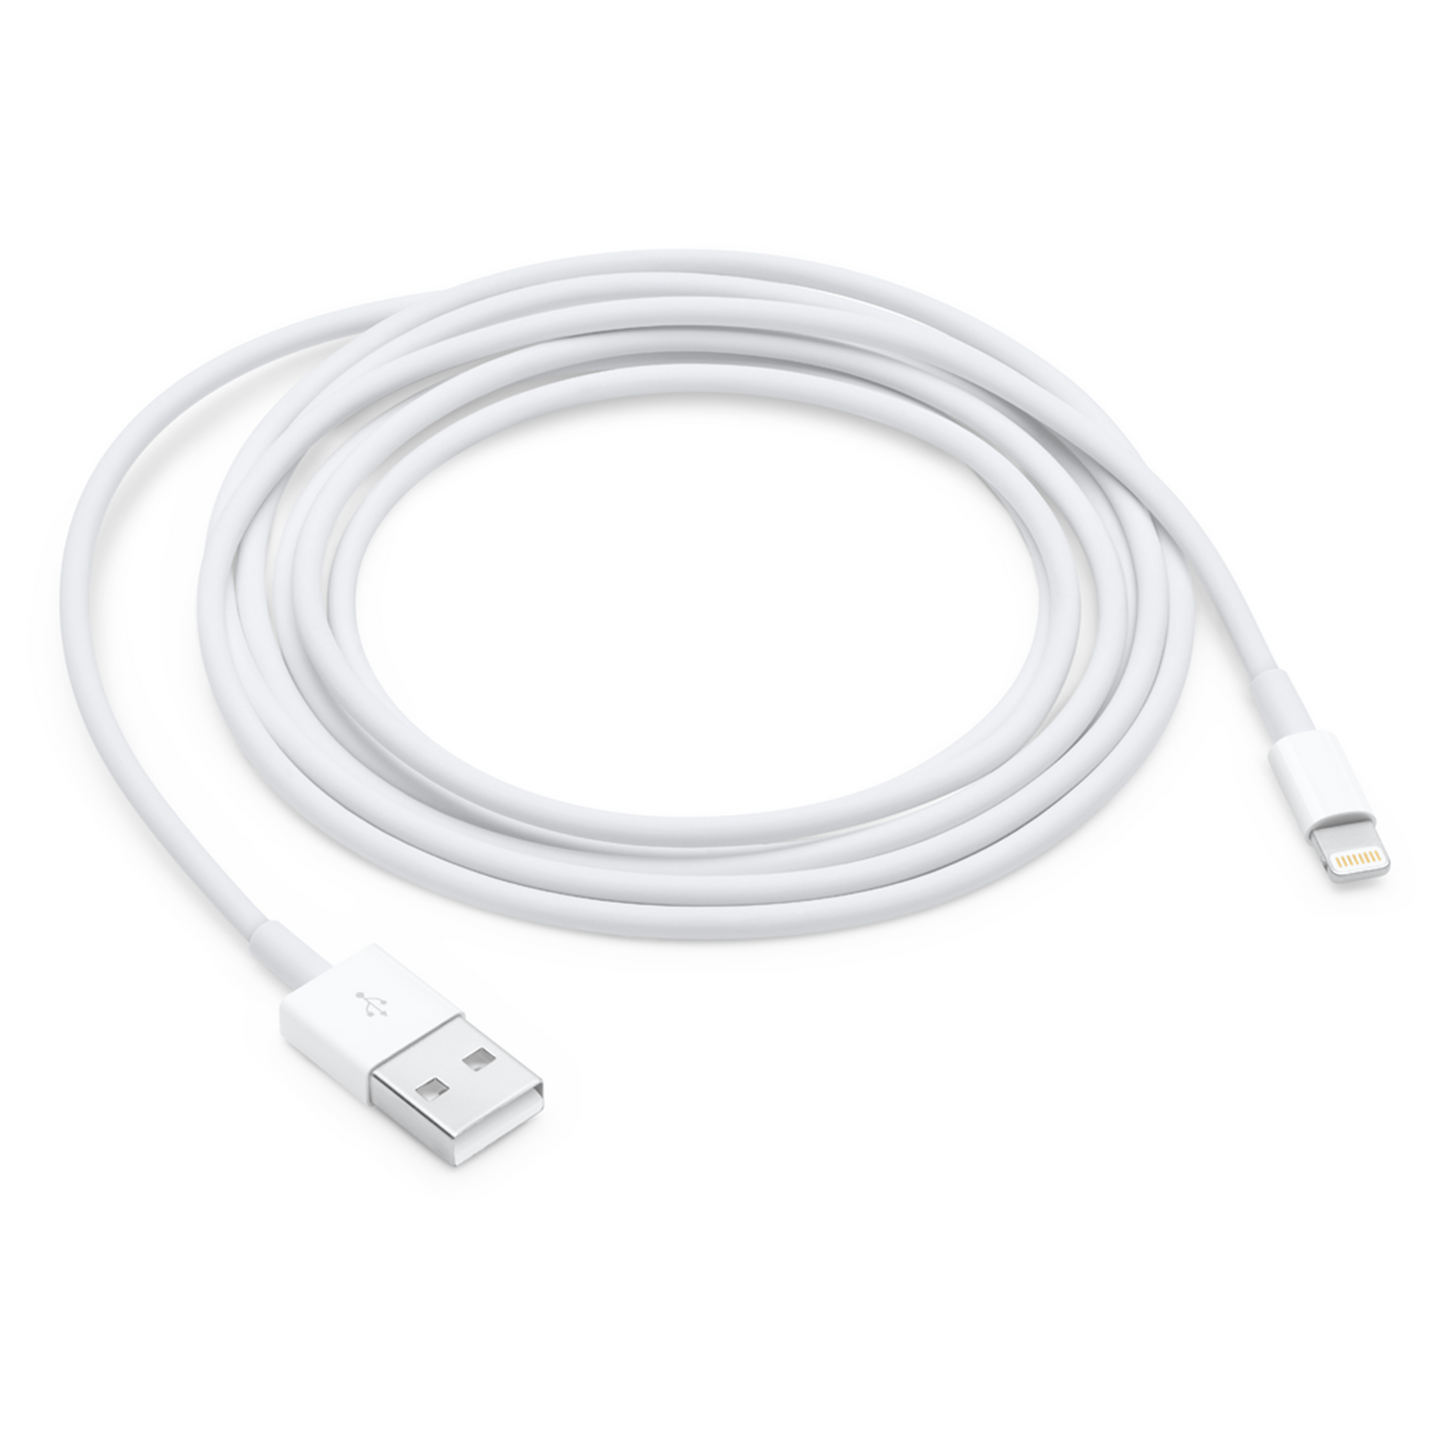 Apple Lightning to USB Cable (2 Meter/6.5 Feet)